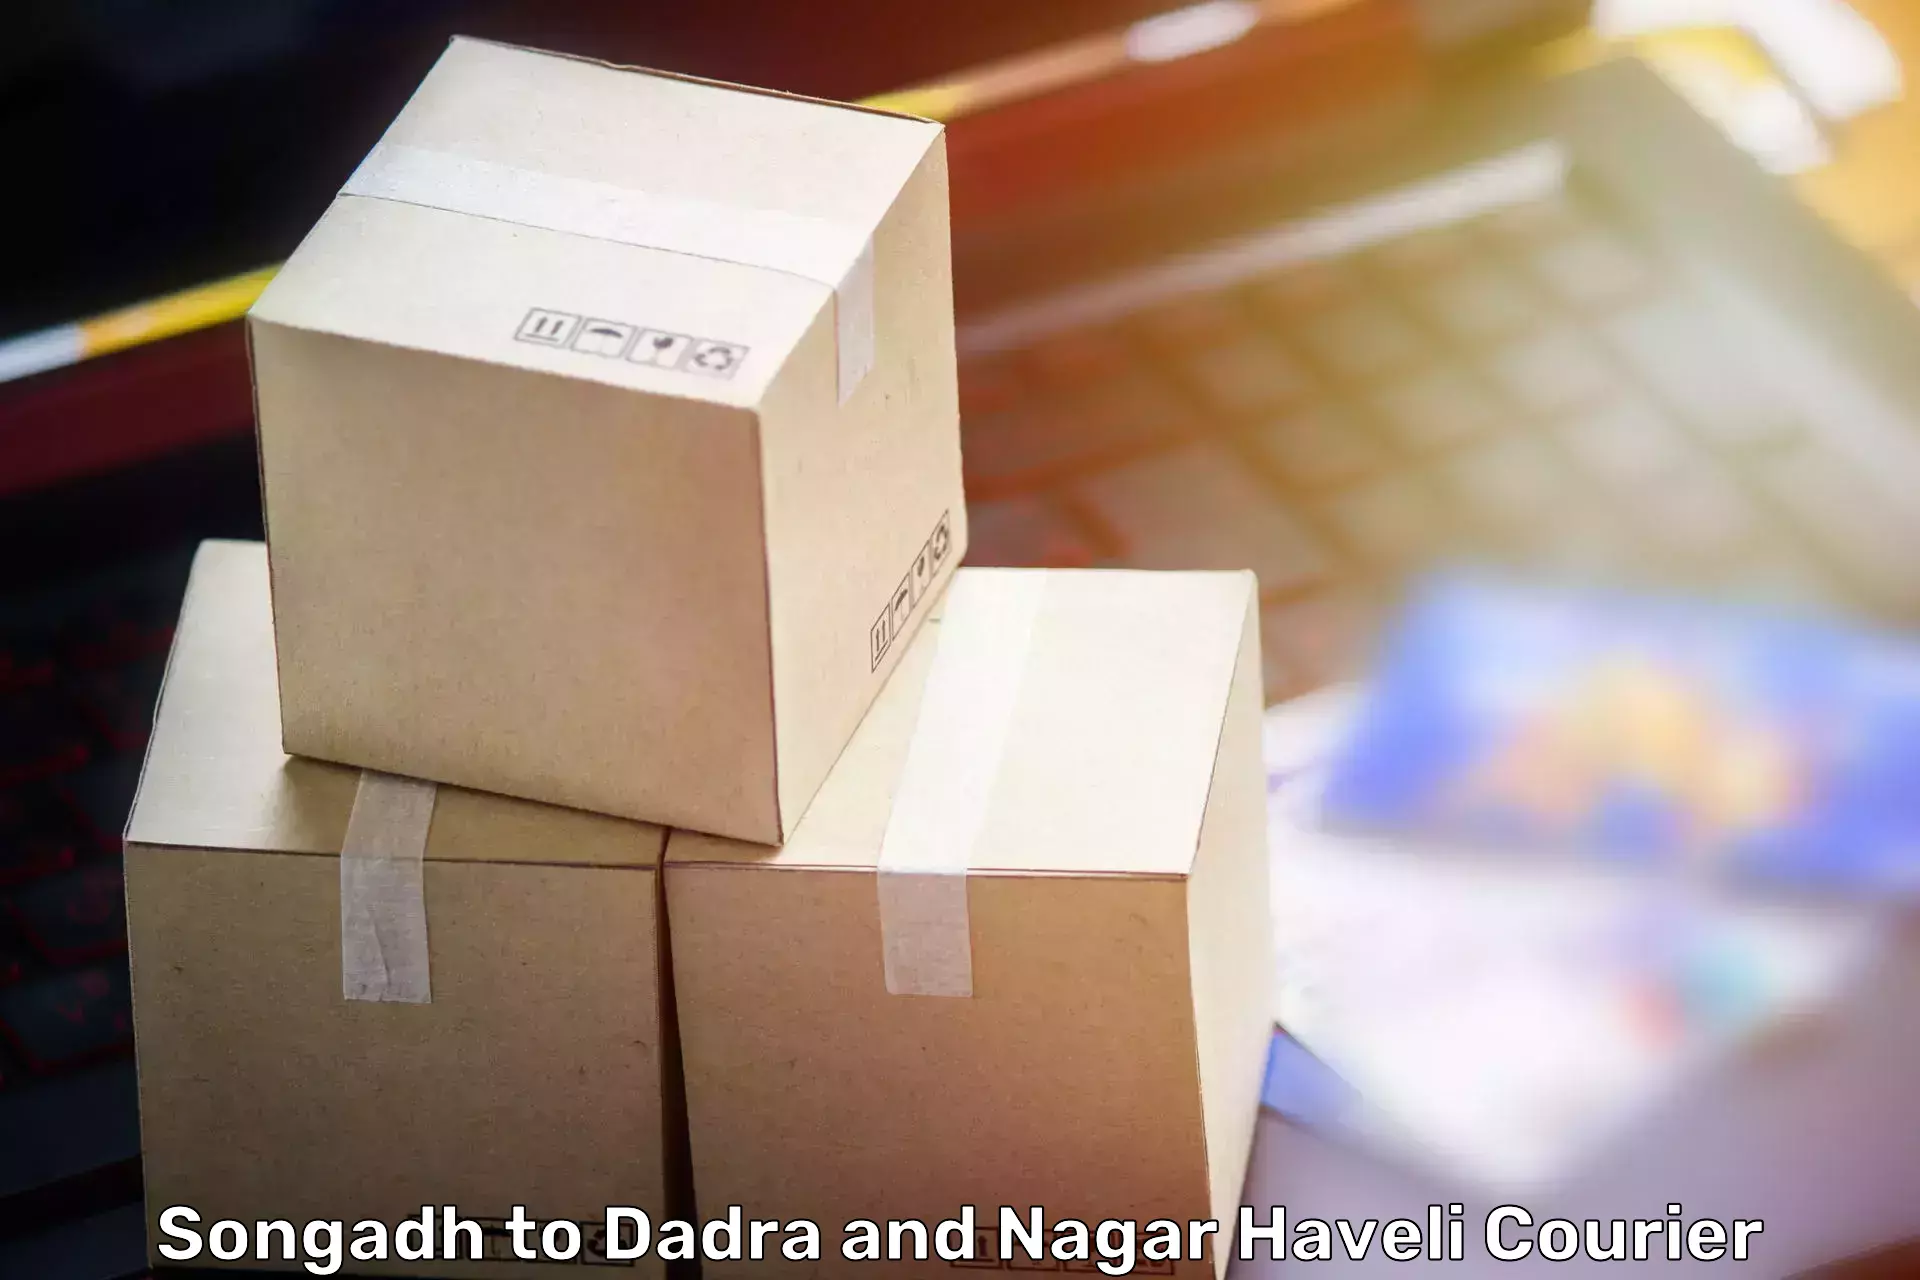 Furniture delivery service Songadh to Silvassa